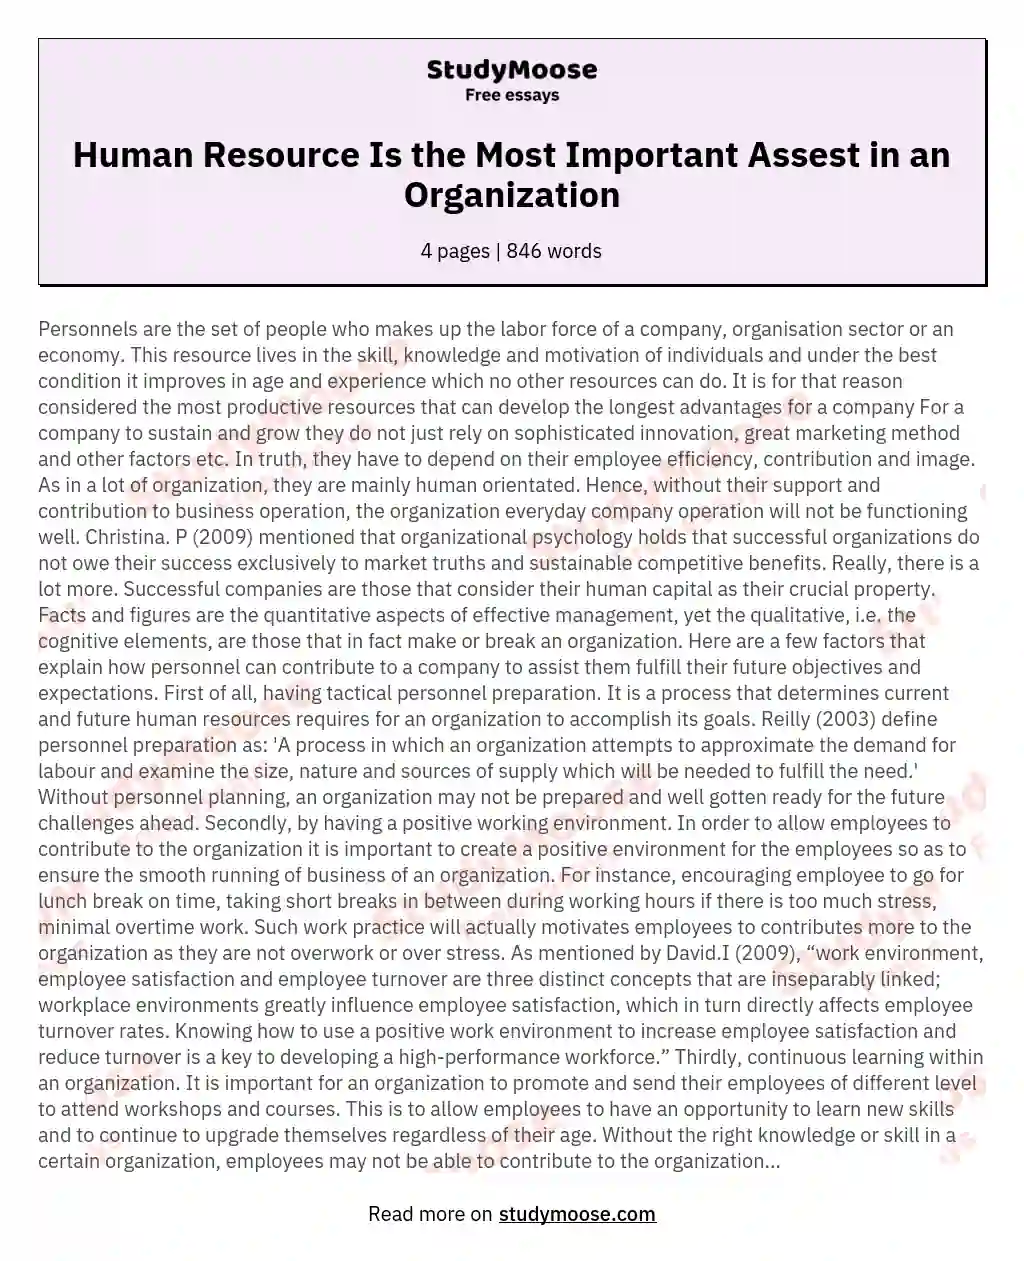 Human Resource Is the Most Important Assest in an Organization essay